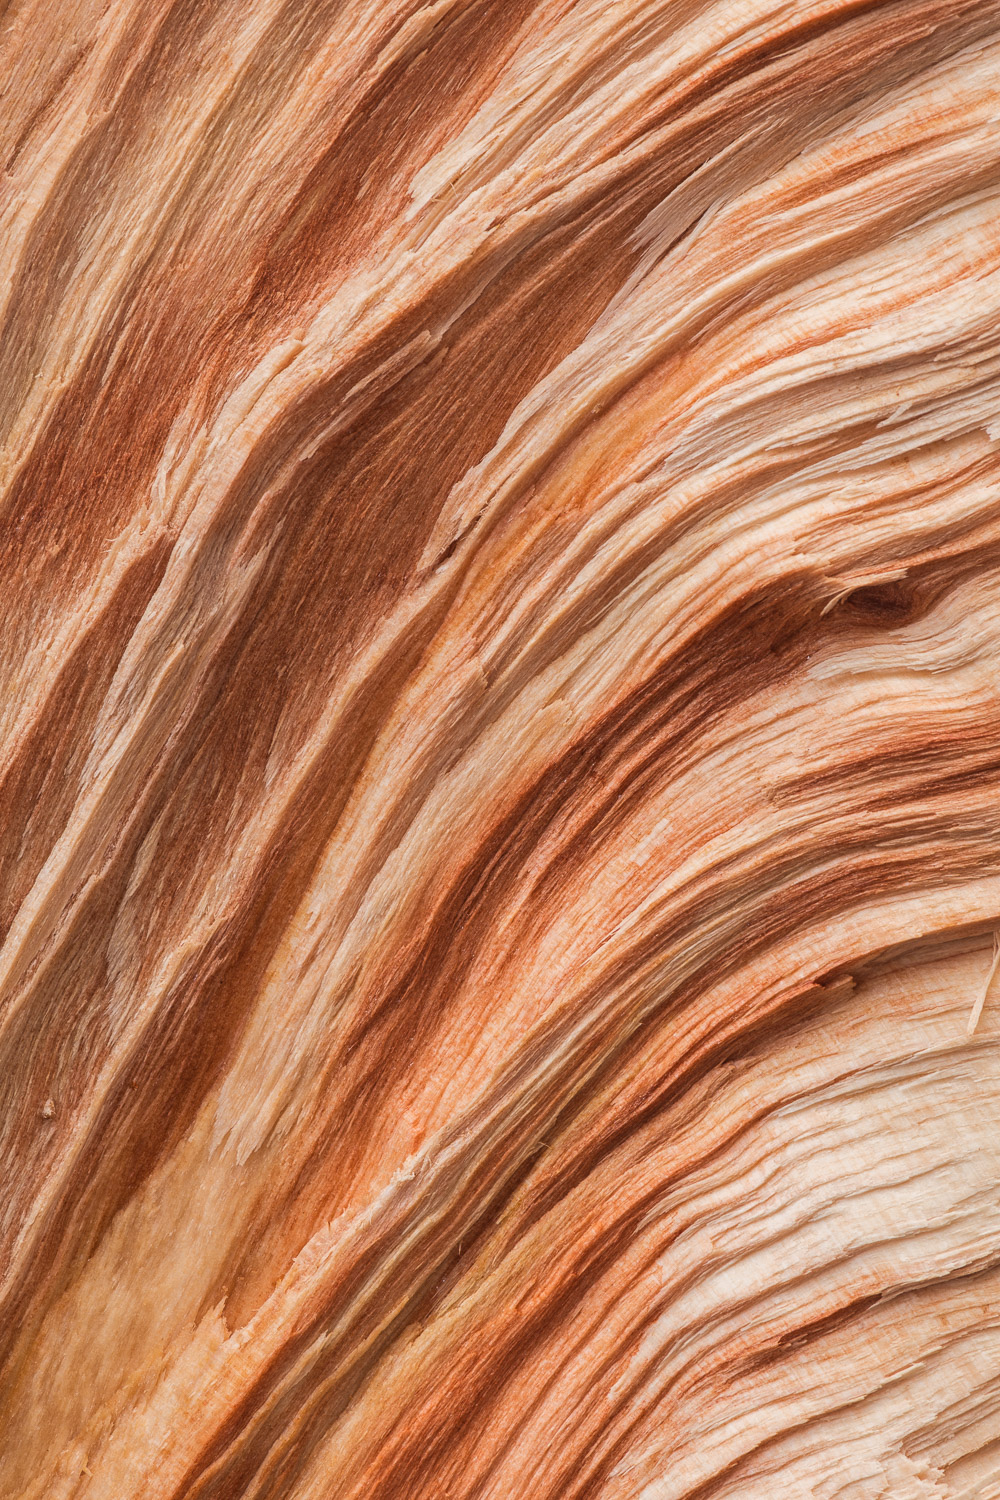 Macro photograph of textures in a split piece of firewood. Image #3067